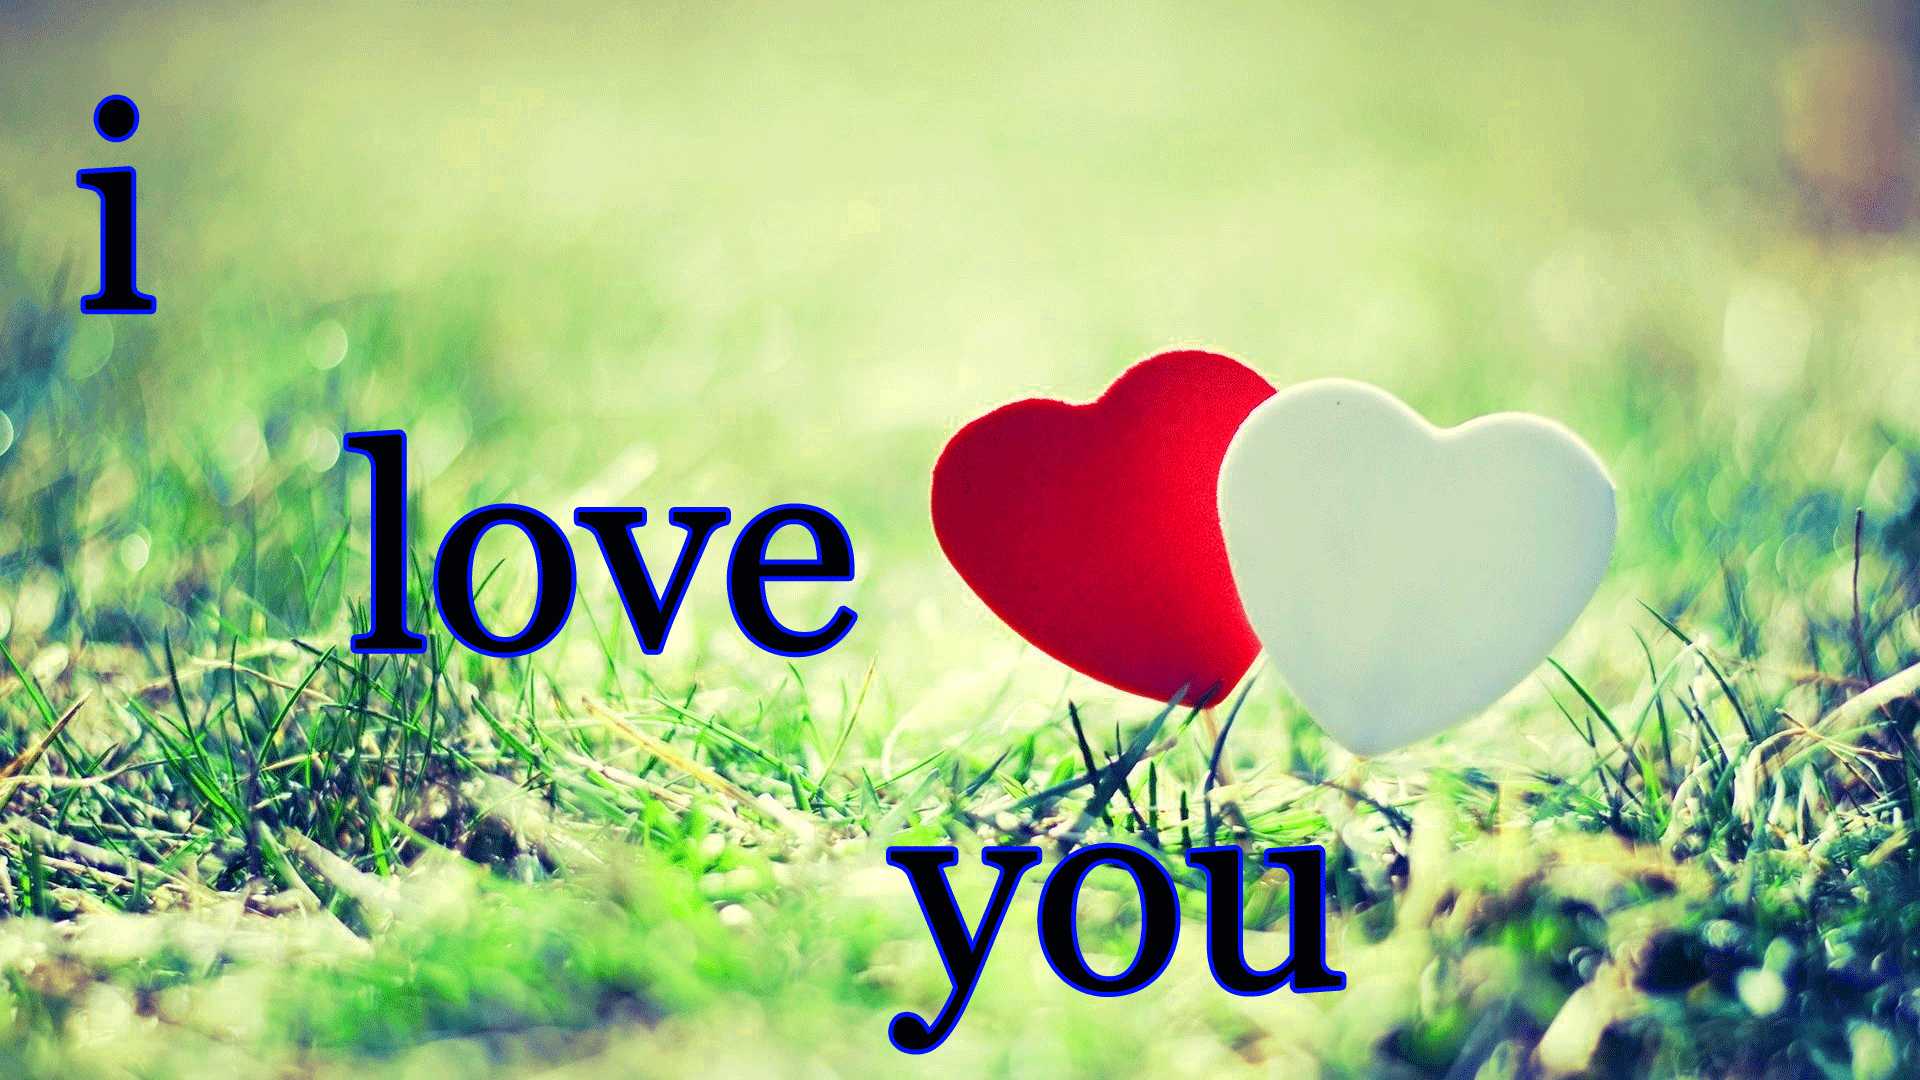 I Love You Hd Wallpapers Wallpaper Cave